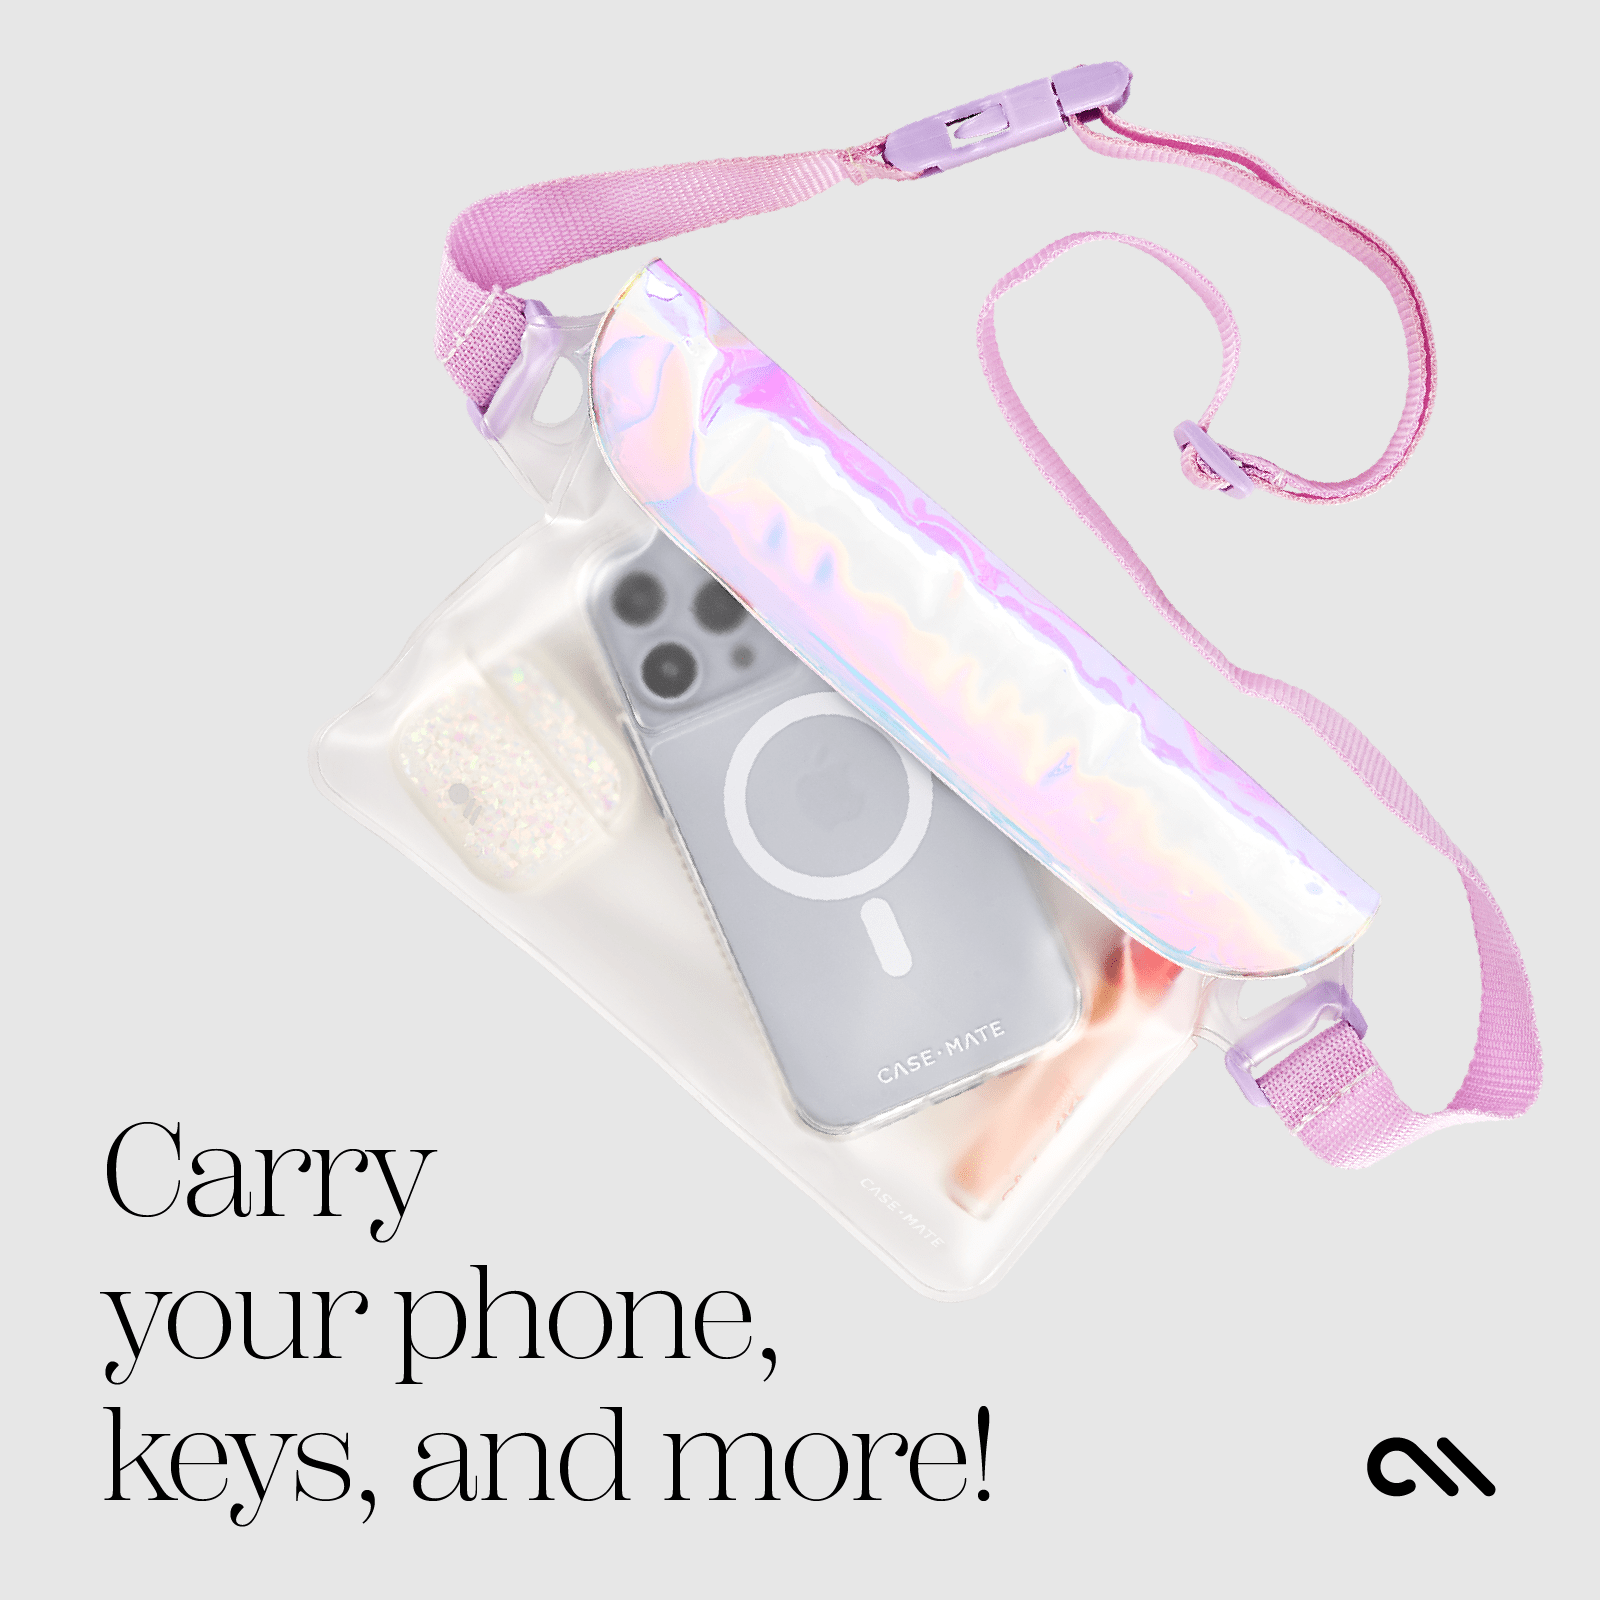 CARRY YOUR PHONE, KEYS AND MORE!